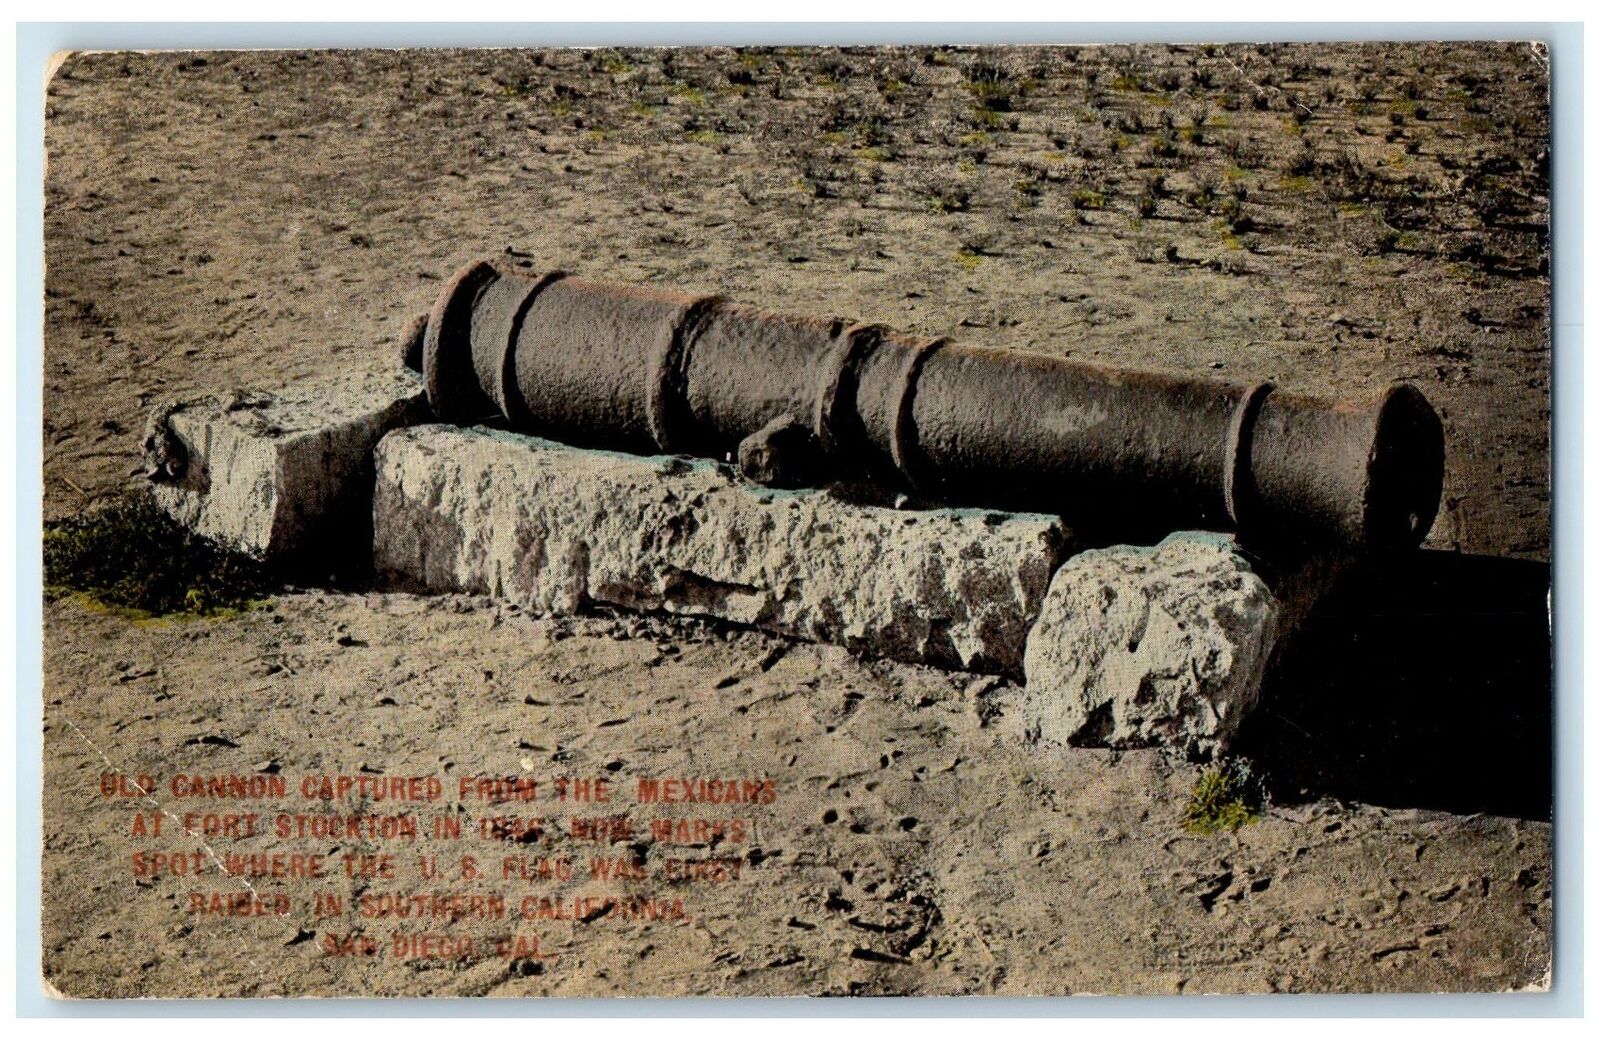 c1910's Old Cannon Captured From Mexicans San Diego California CA Expo Postcard